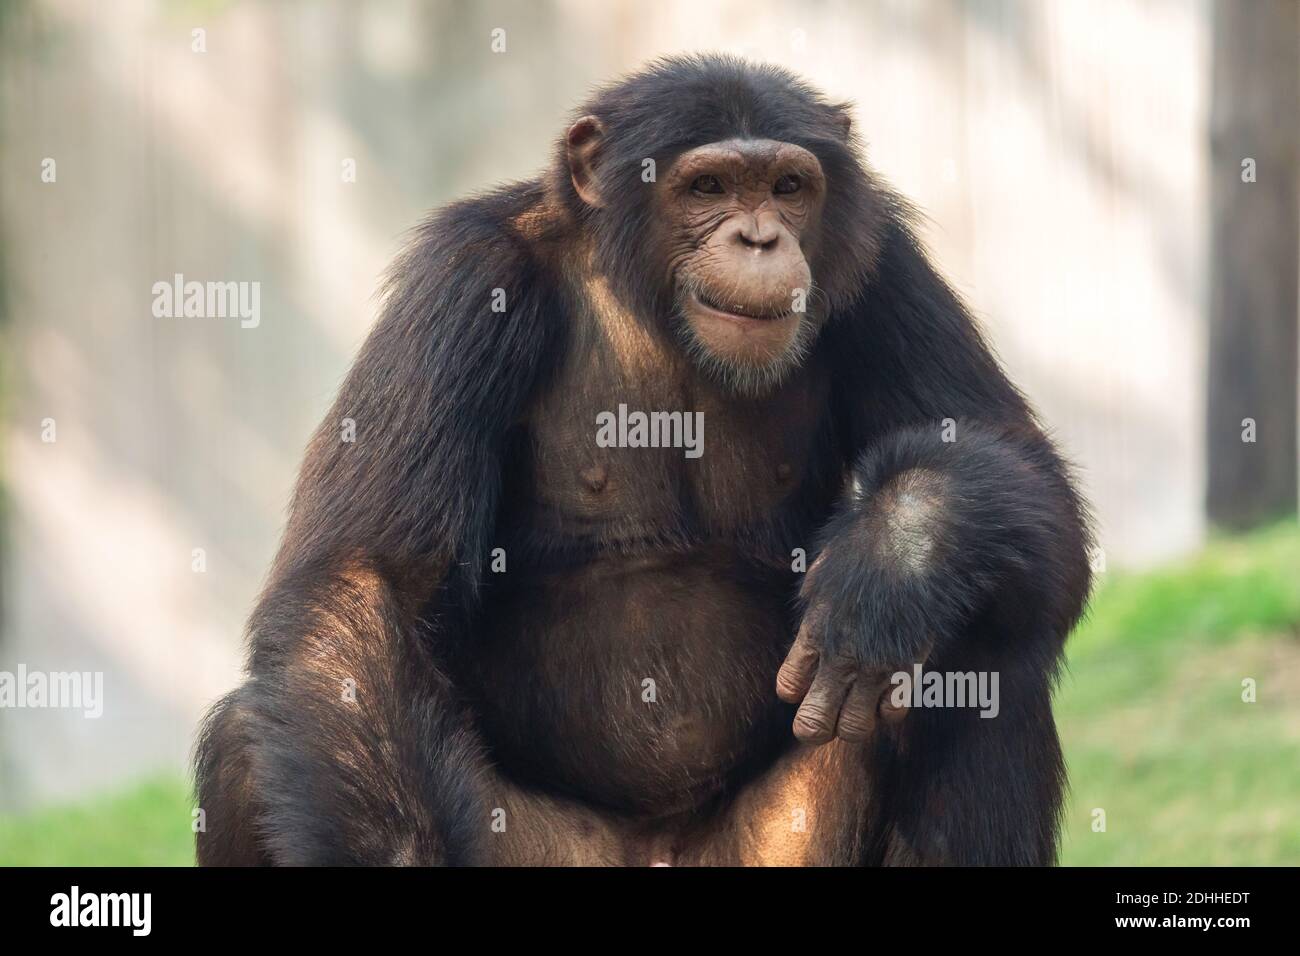 Chimpanzee ape in close up portrait view shot at an Indian animal sanctuary Stock Photo